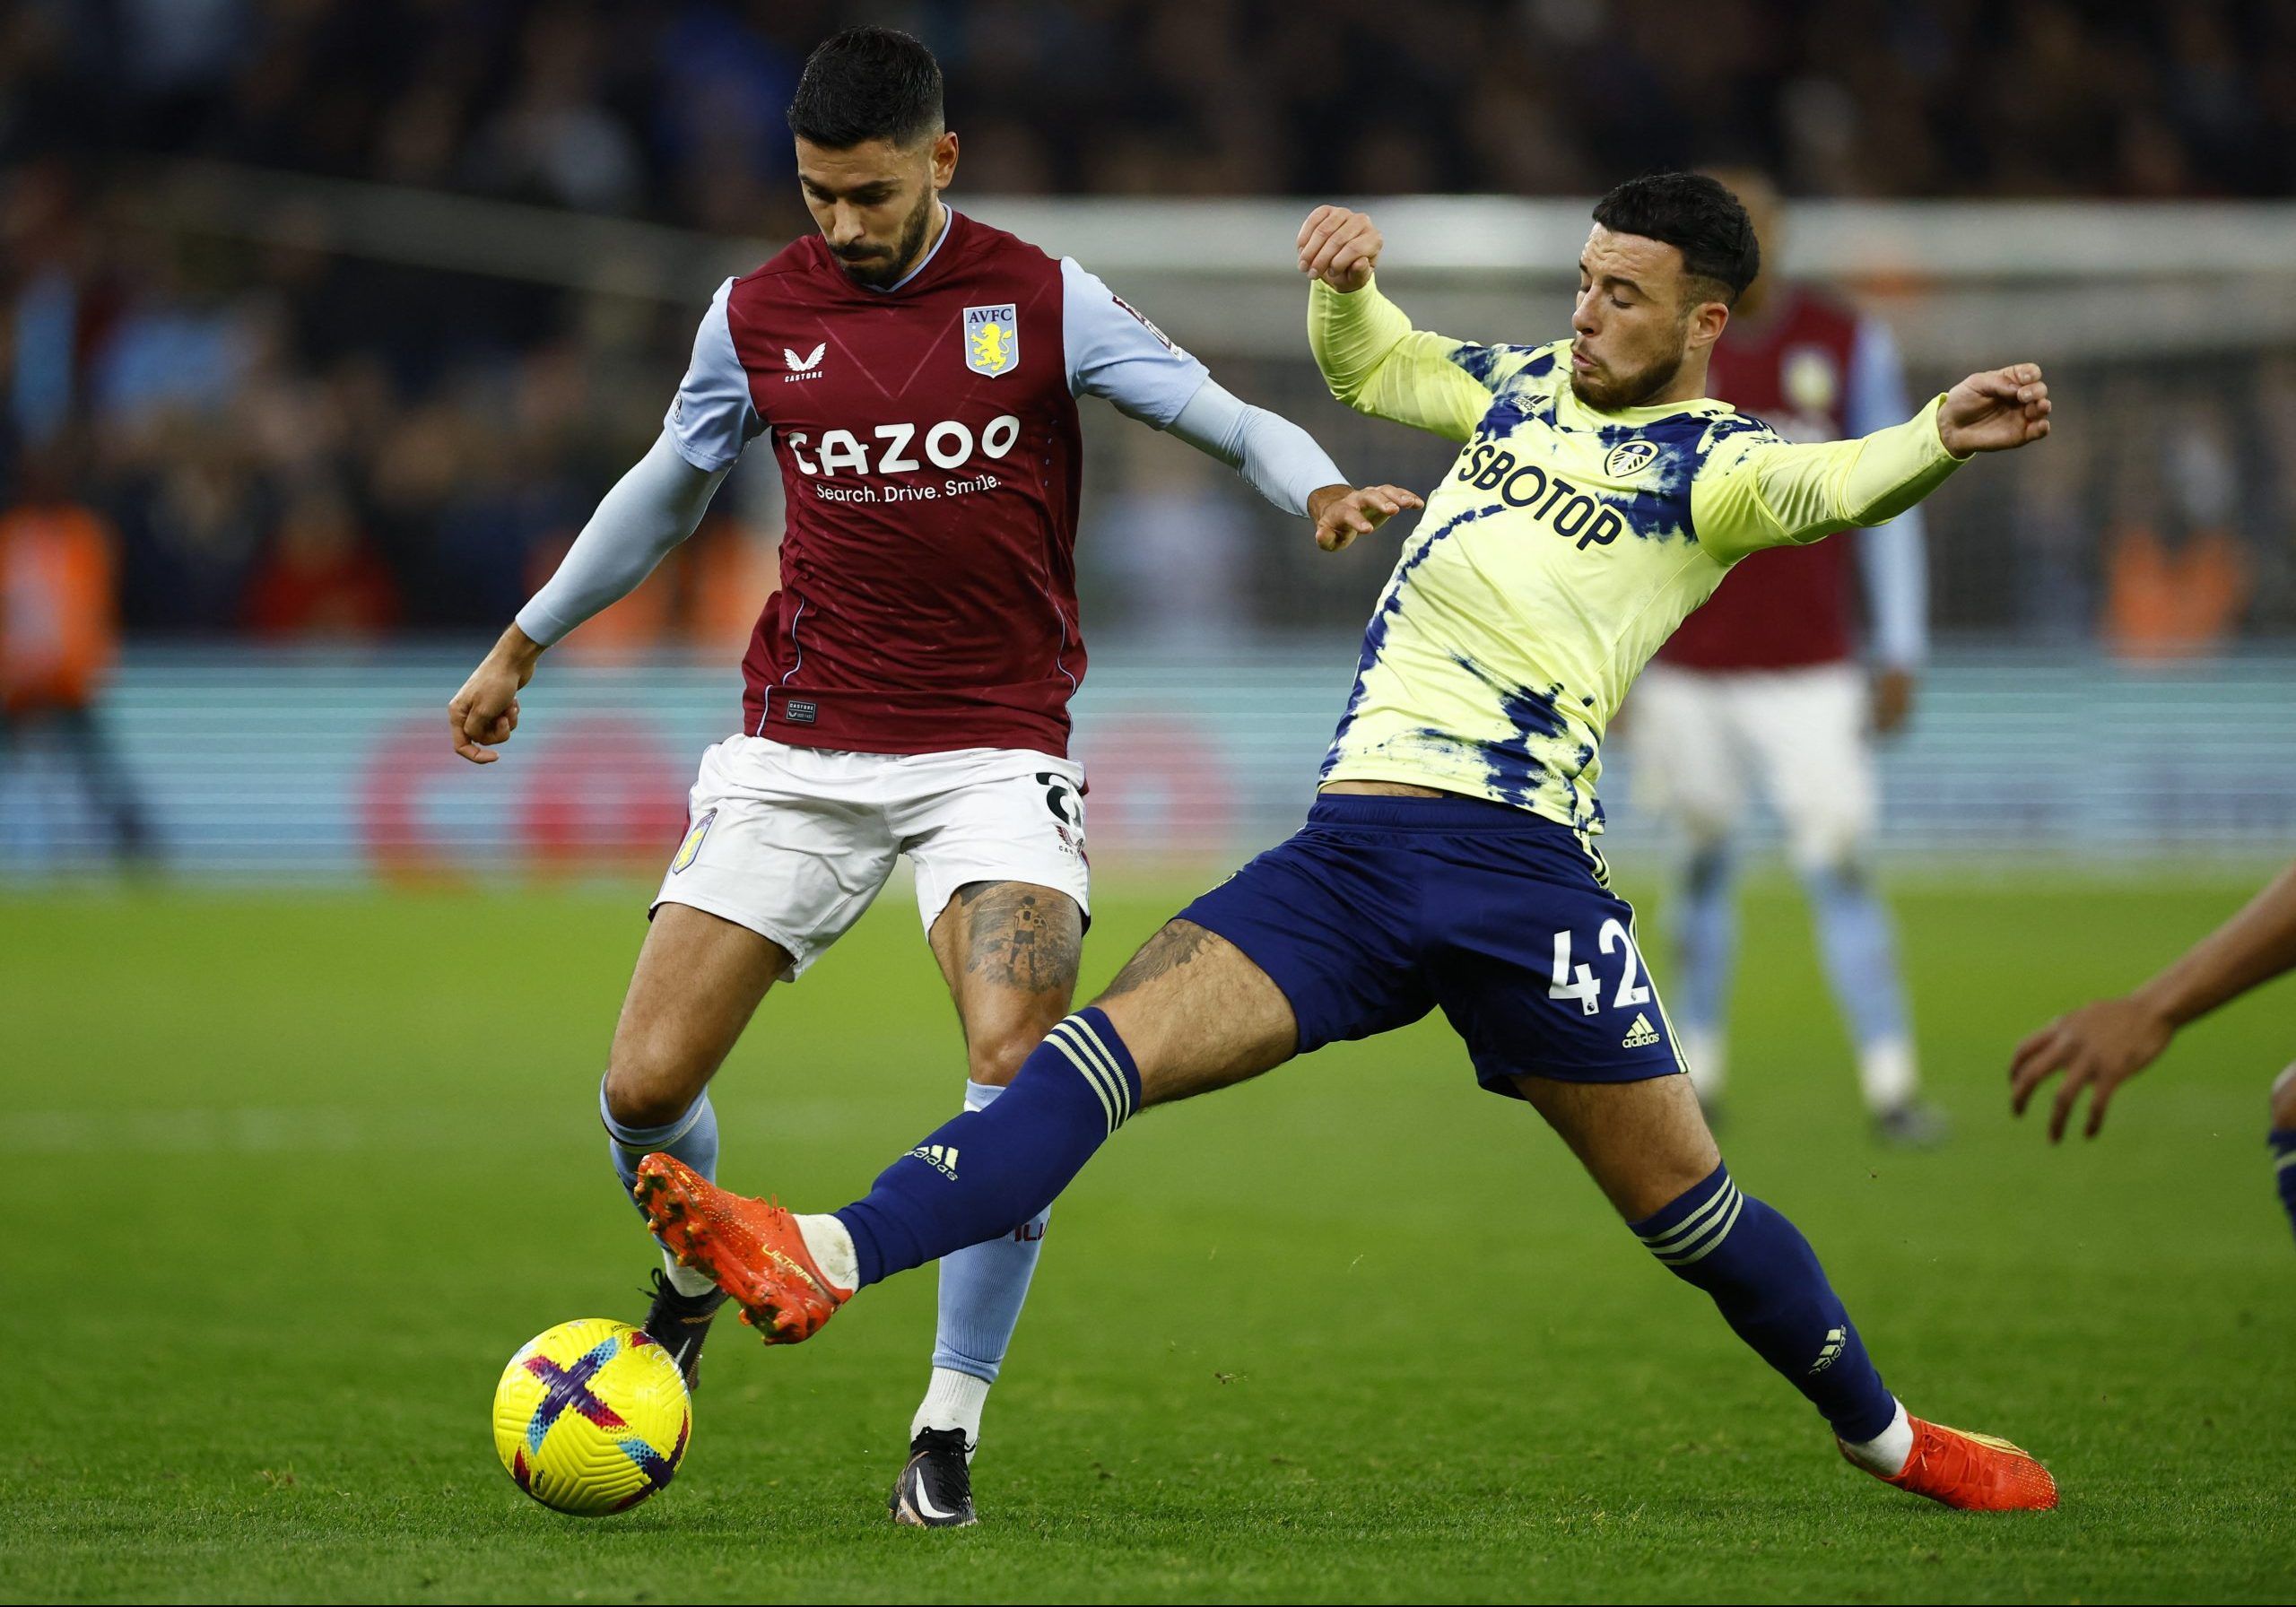 Soccer Football - Premier League - Aston Villa v Leeds United - Villa Park, Birmingham, Britain - January 13, 2023 Aston Villa's Morgan Sanson in action with Leeds United's Sam Greenwood Action Images via Reuters/Andrew Boyers EDITORIAL USE ONLY. No use with unauthorized audio, video, data, fixture lists, club/league logos or 'live' services. Online in-match use limited to 75 images, no video emulation. No use in betting, games or single club /league/player publications.  Please contact your acc